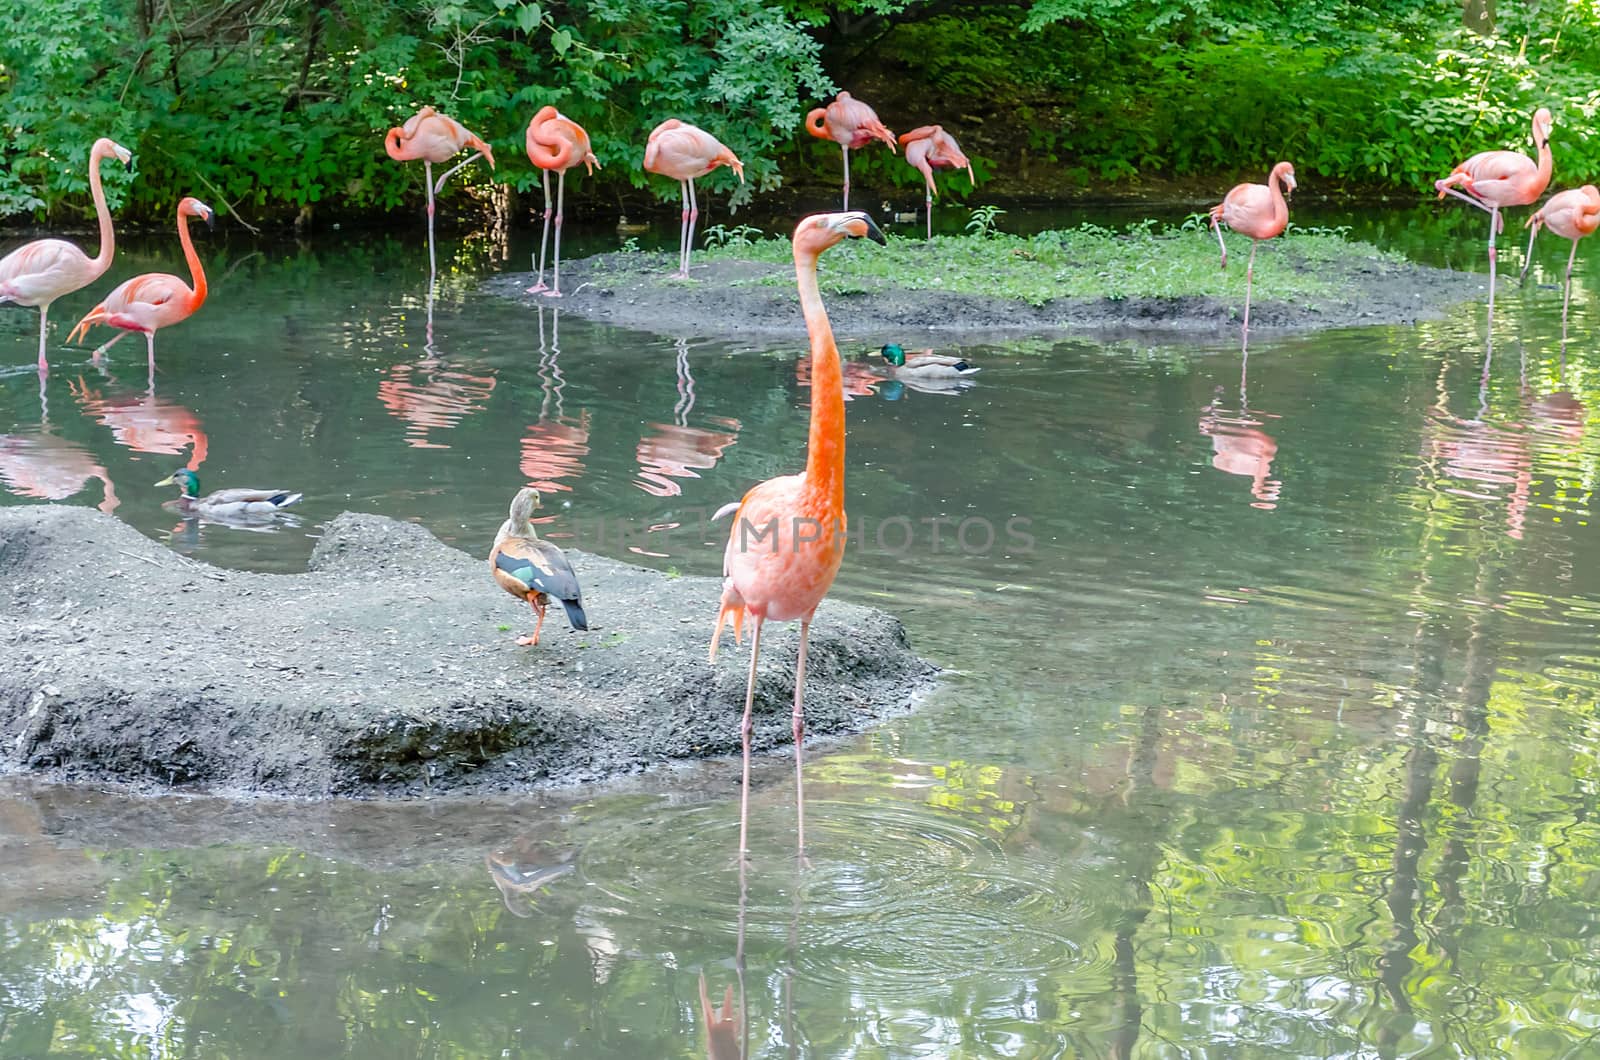 A group of colorful flamingos bathing in the pond